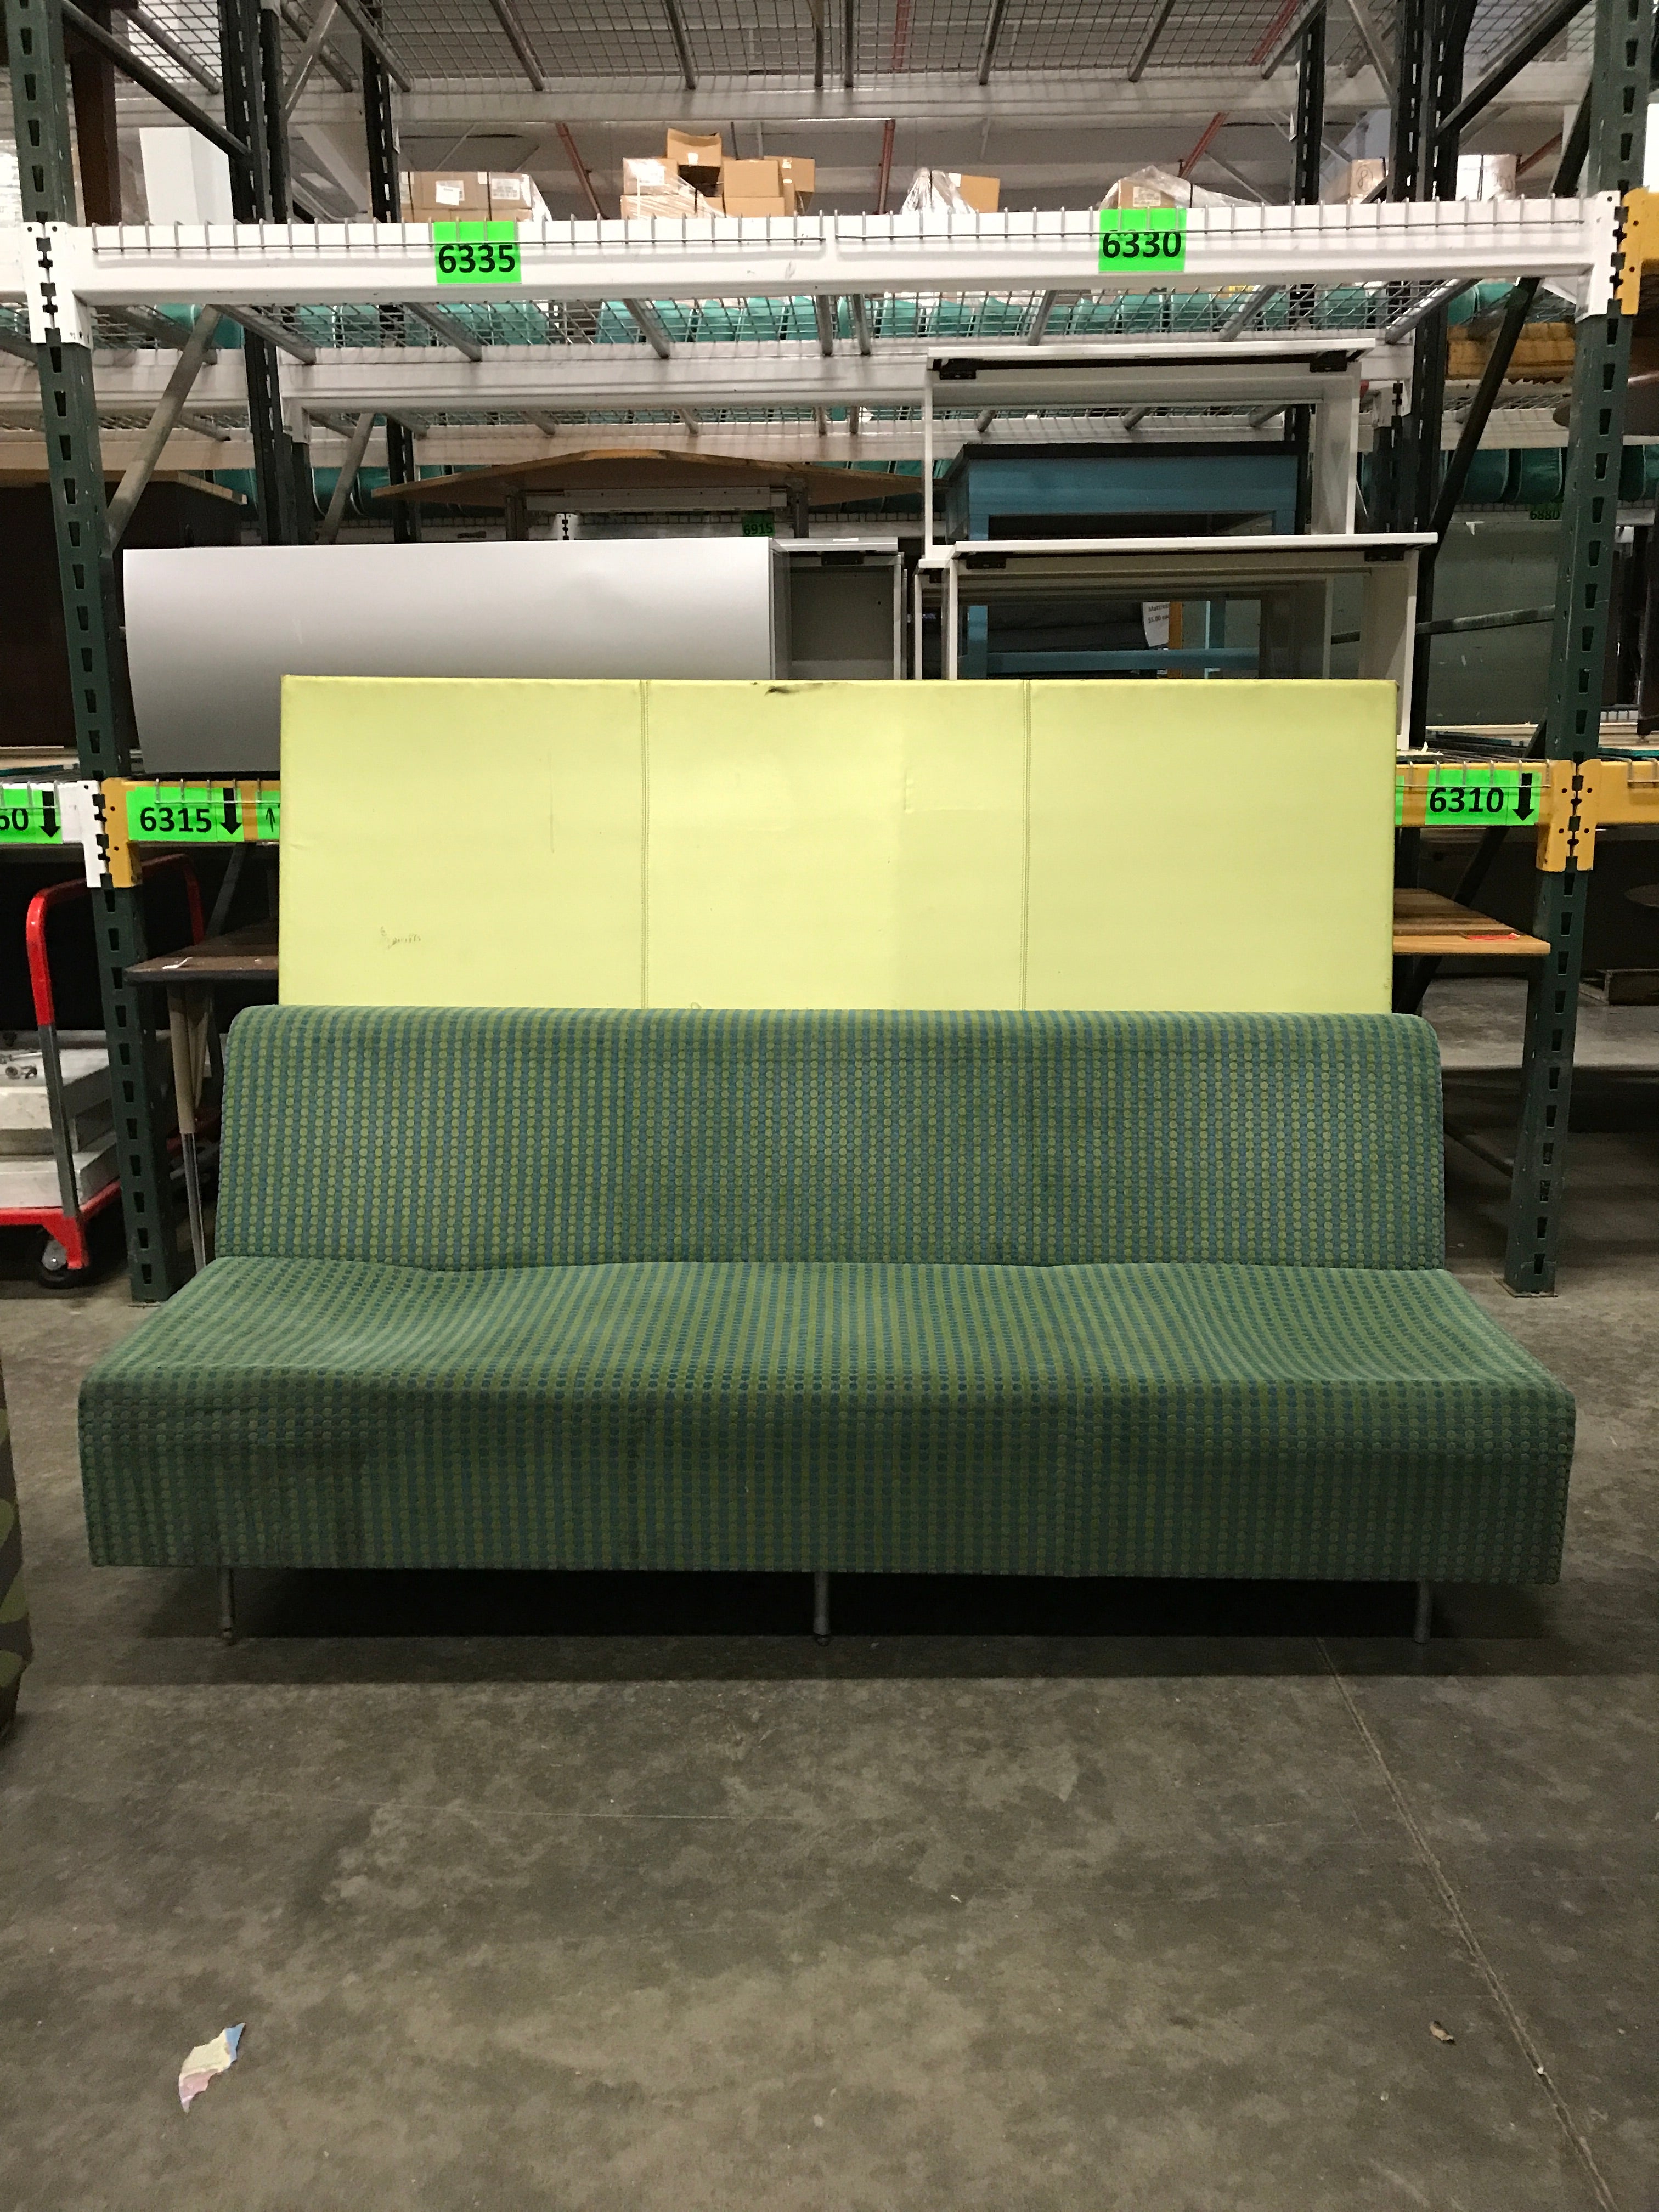 Blue Upholstered Couch with Green Backboard